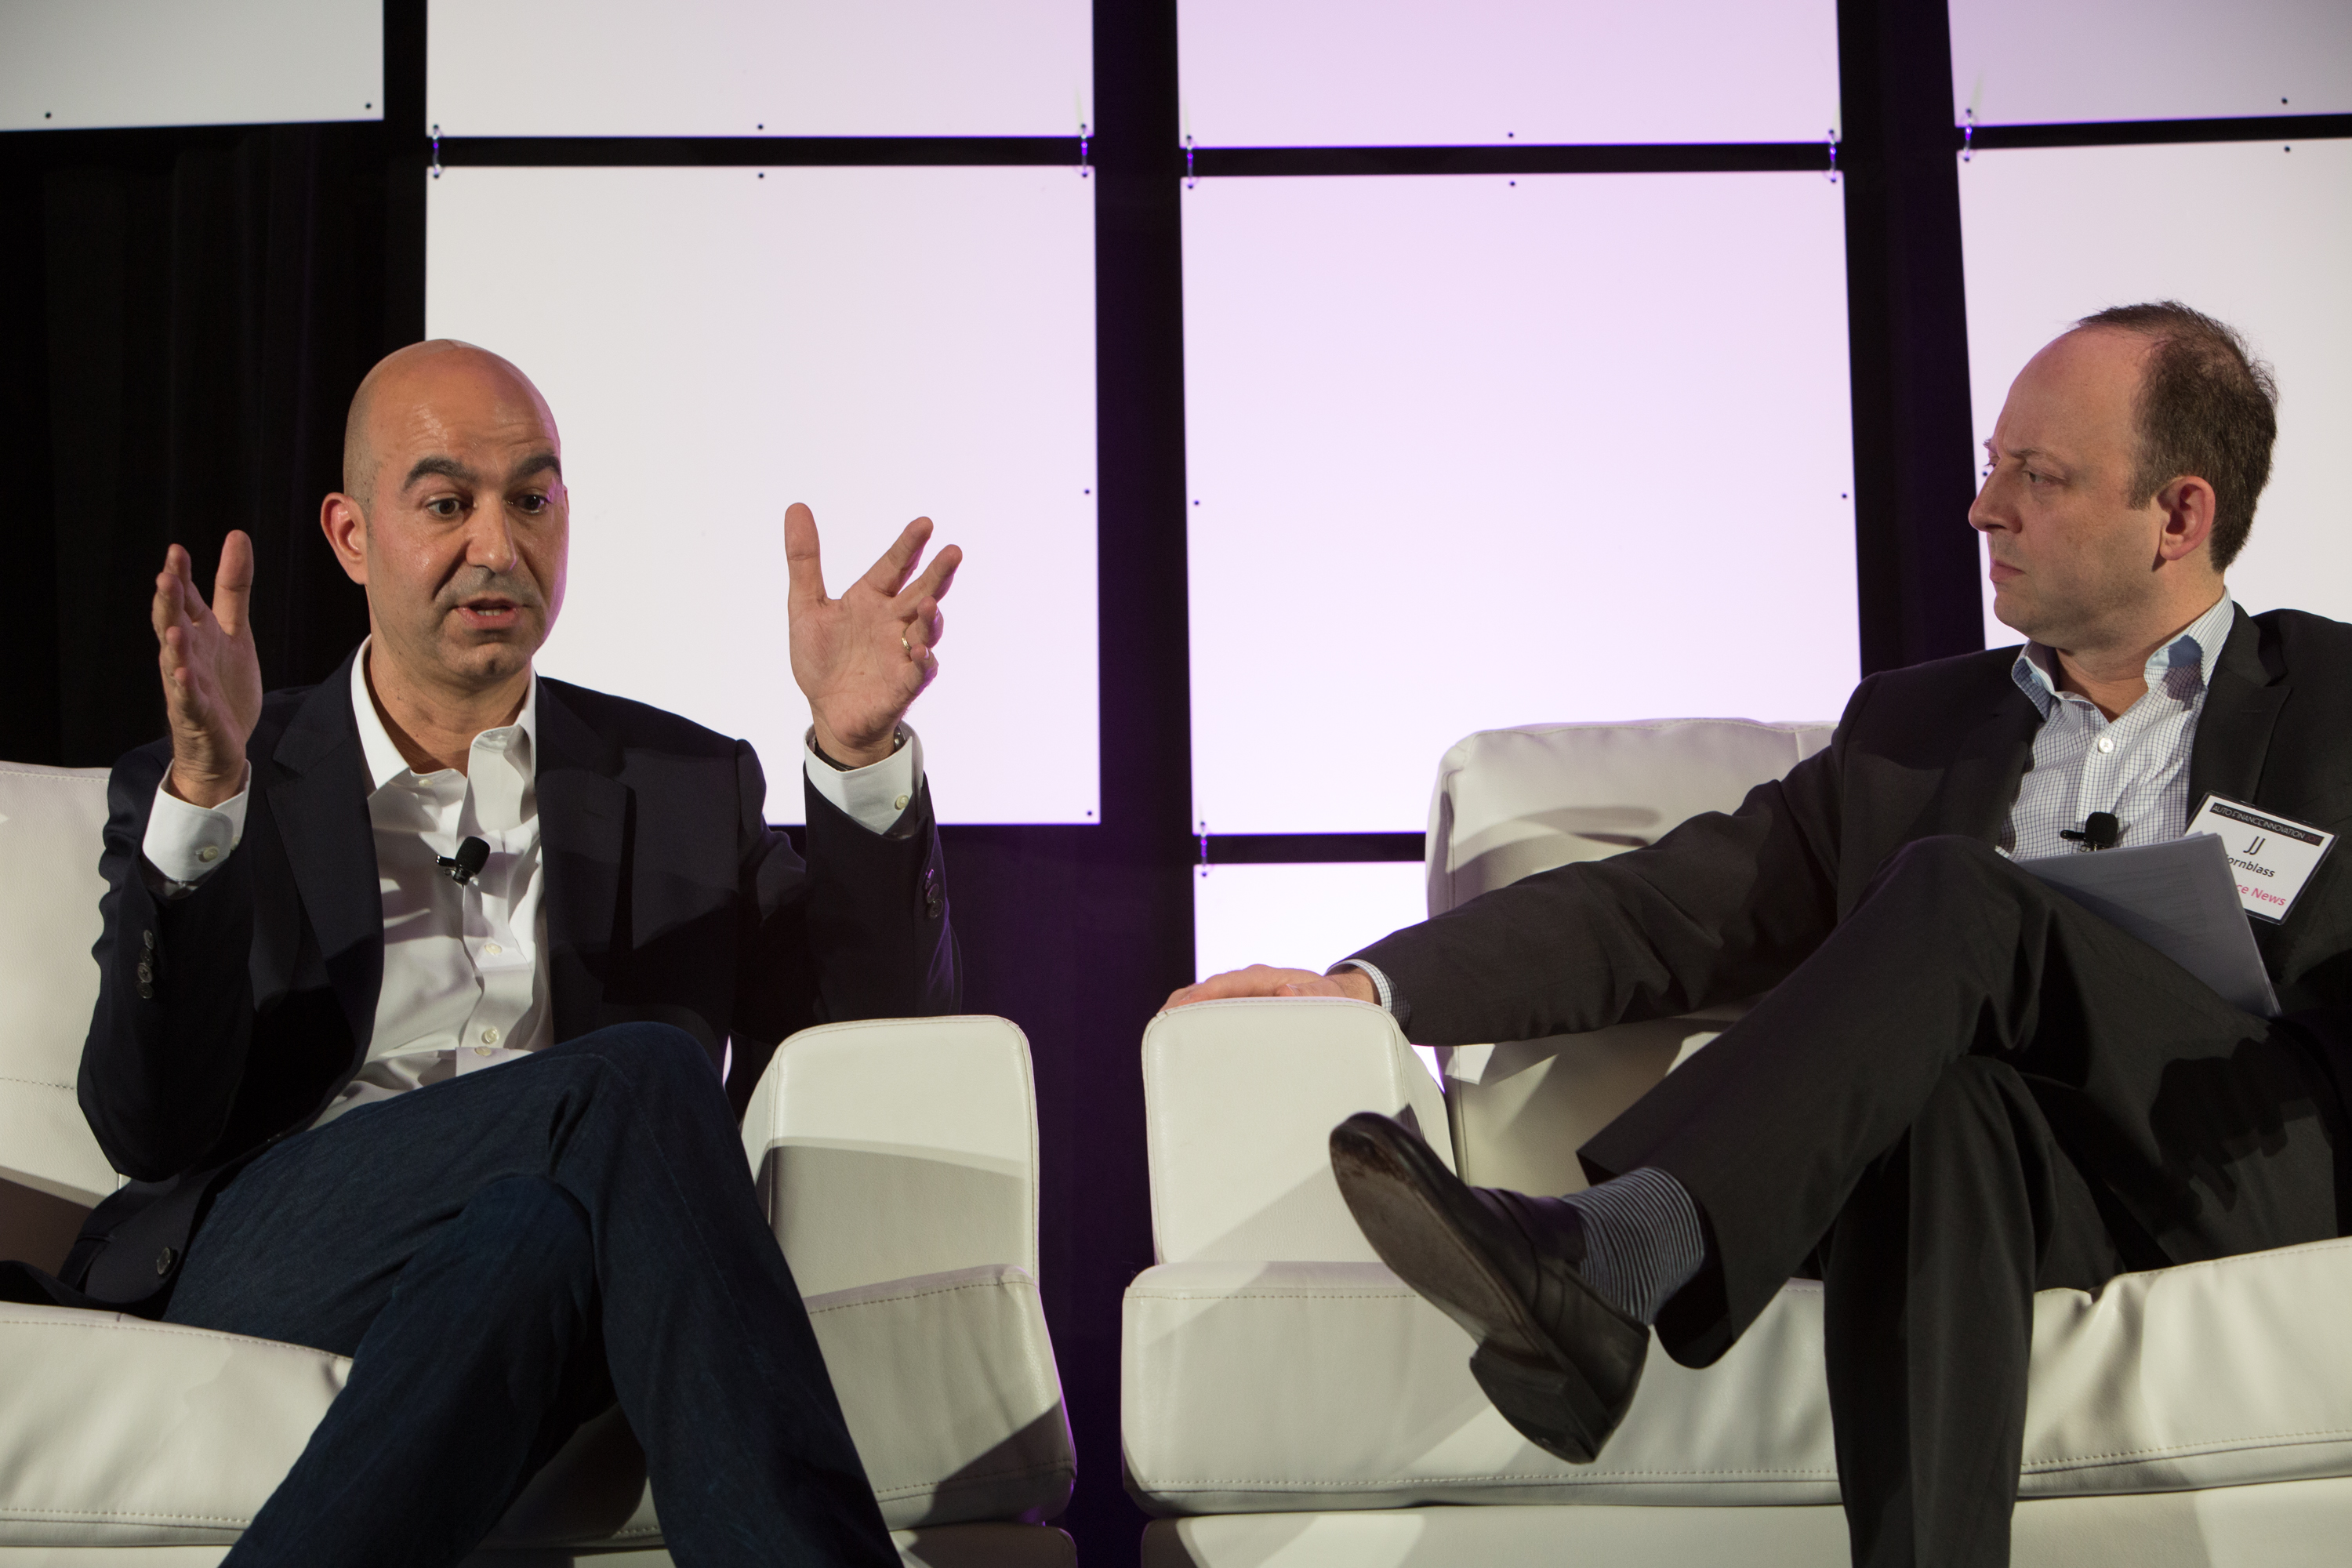 Peter Gasparro, Chase Auto Finance's head of strategy and business development, sat down for a fireside chat at Auto Finance Innovation 2017.